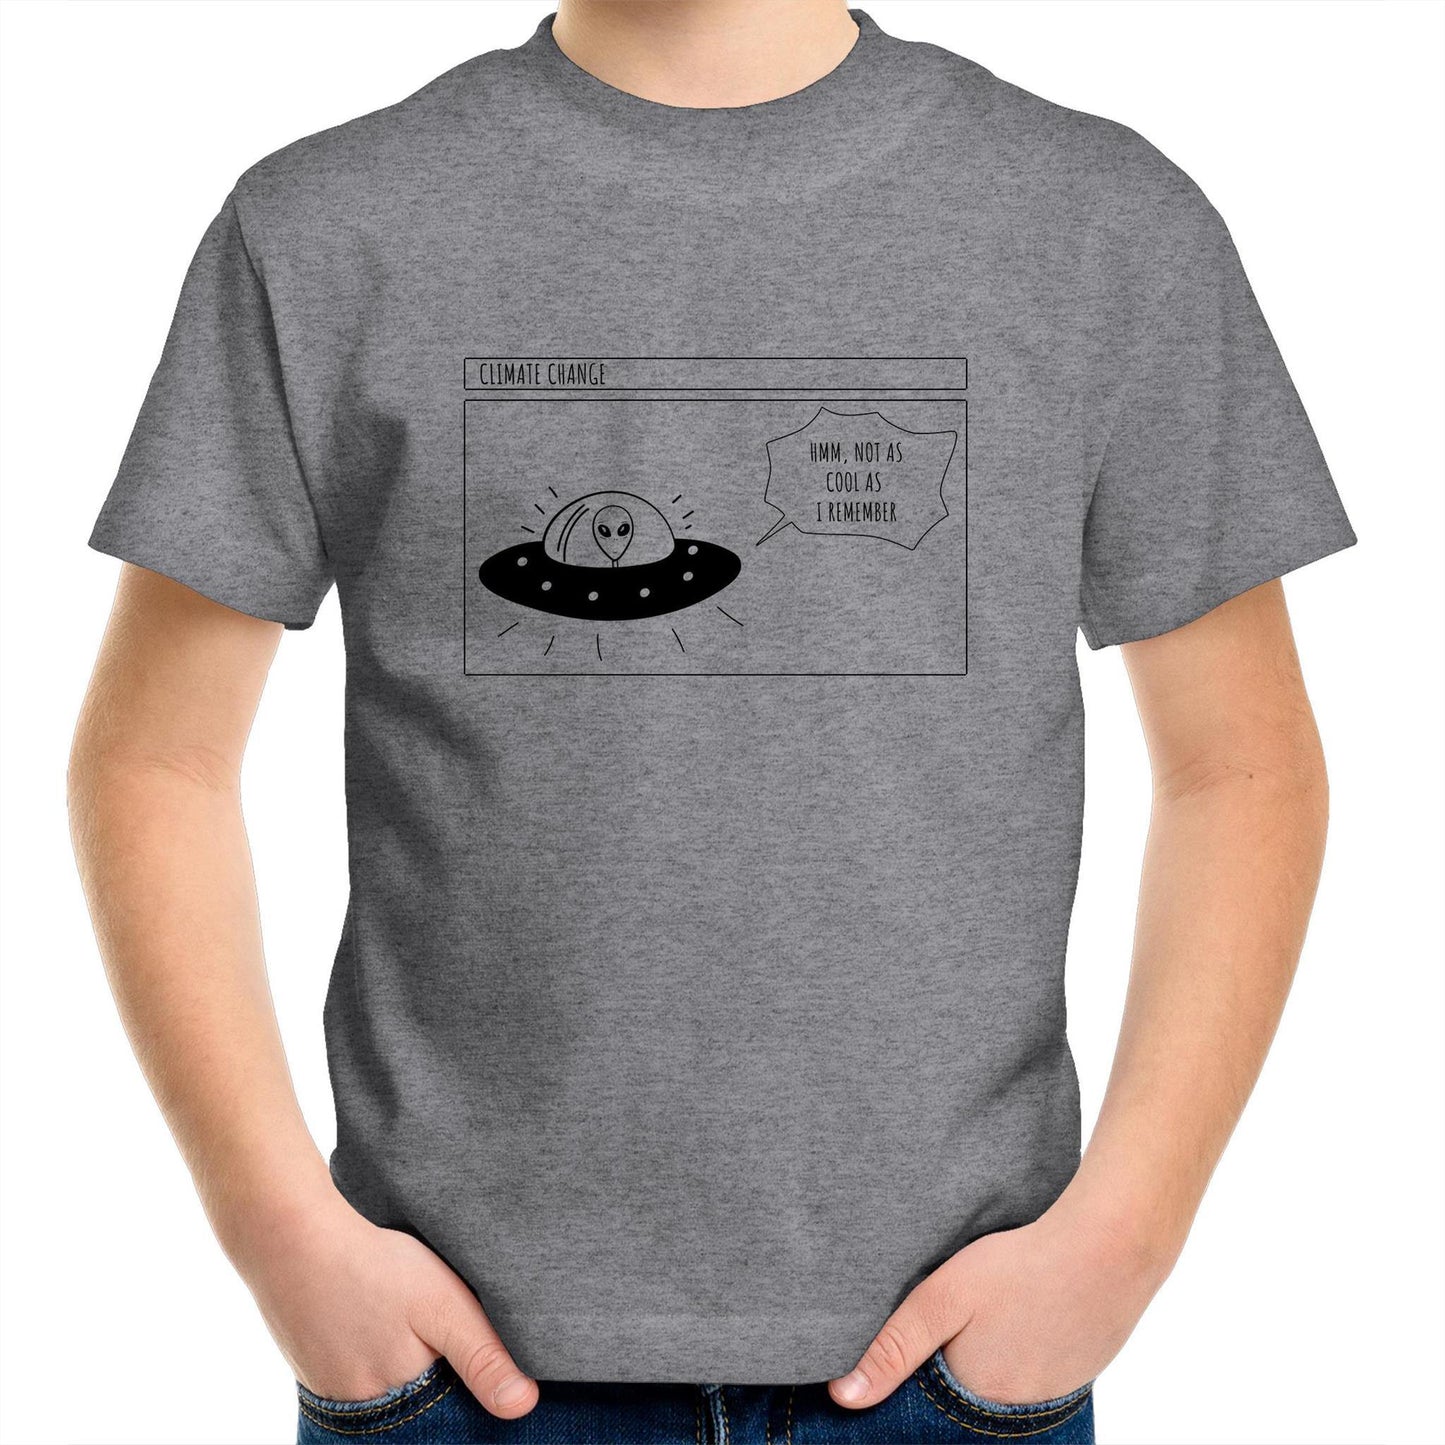 Alien Climate Change - Kids Youth Crew T-Shirt Grey Marle Kids Youth T-shirt Environment Retro Sci Fi Space